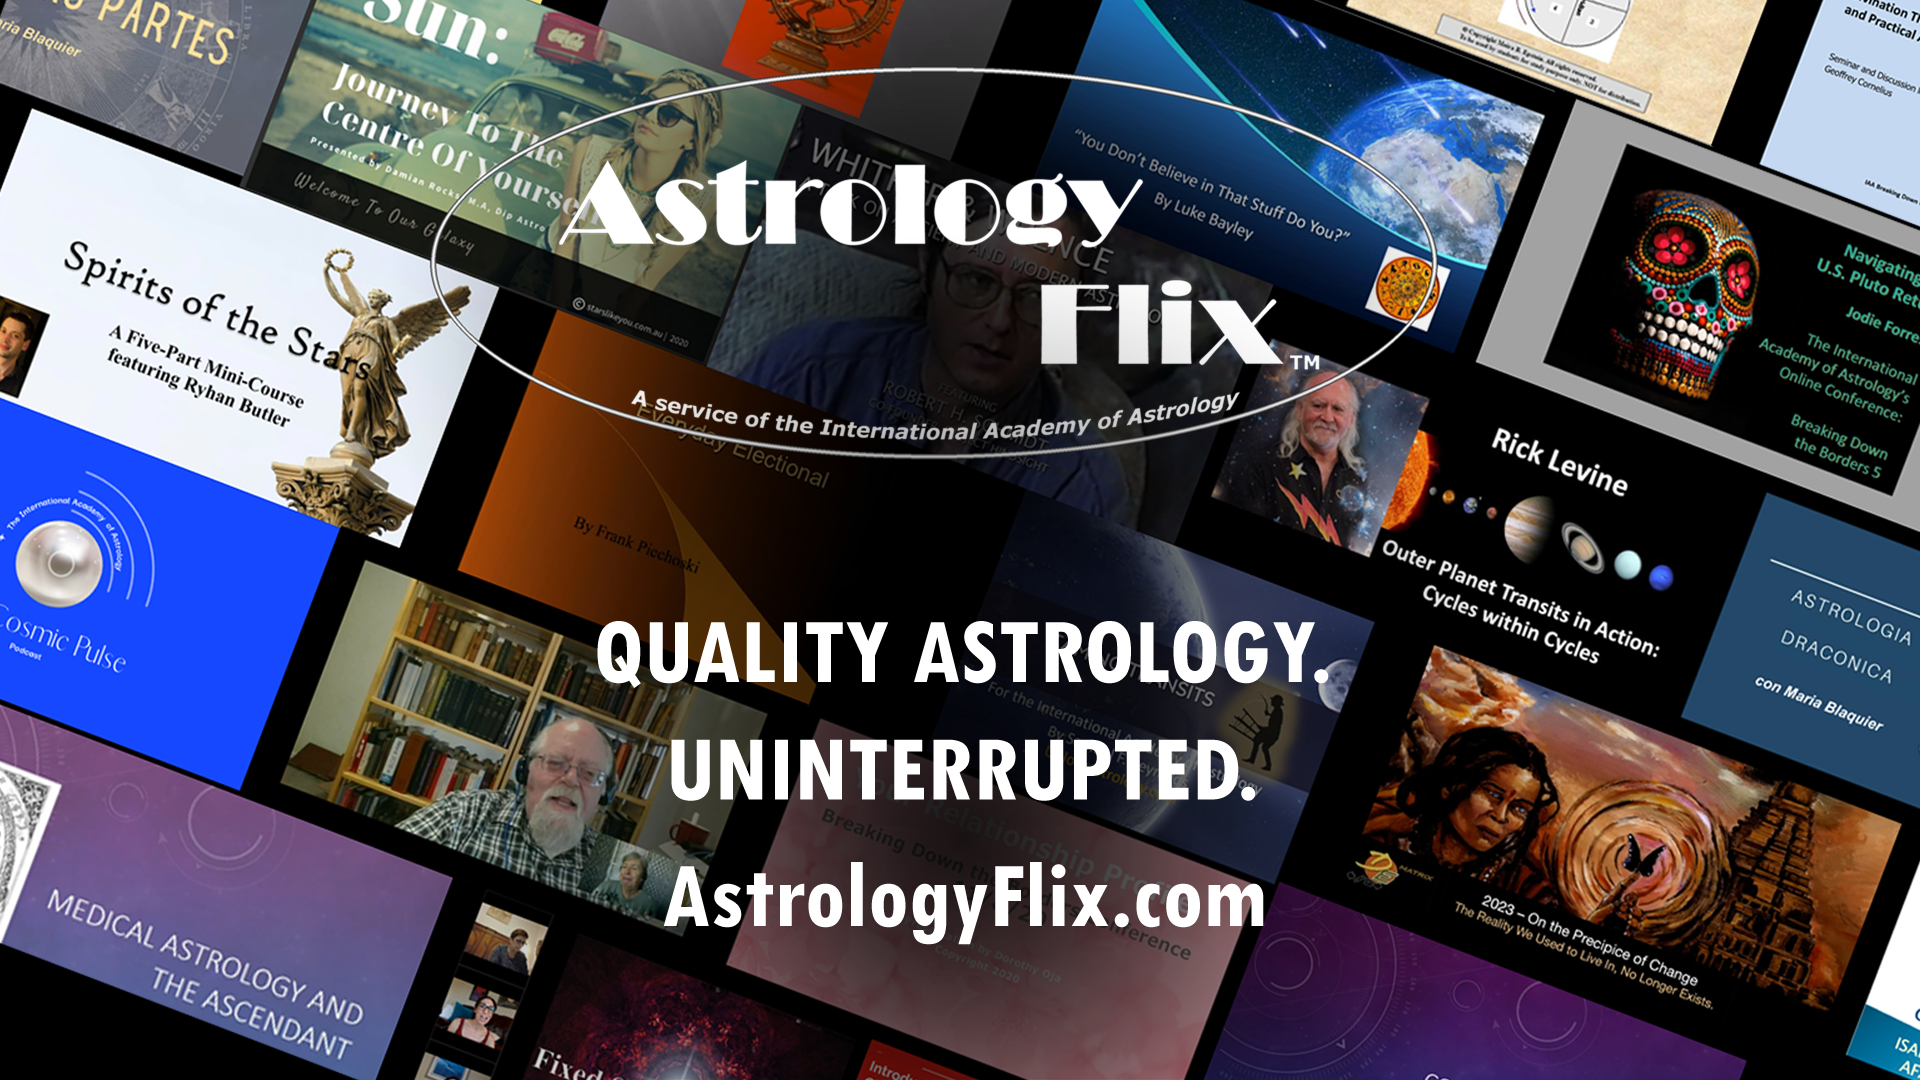 AstrologyFlix Streaming Video Service